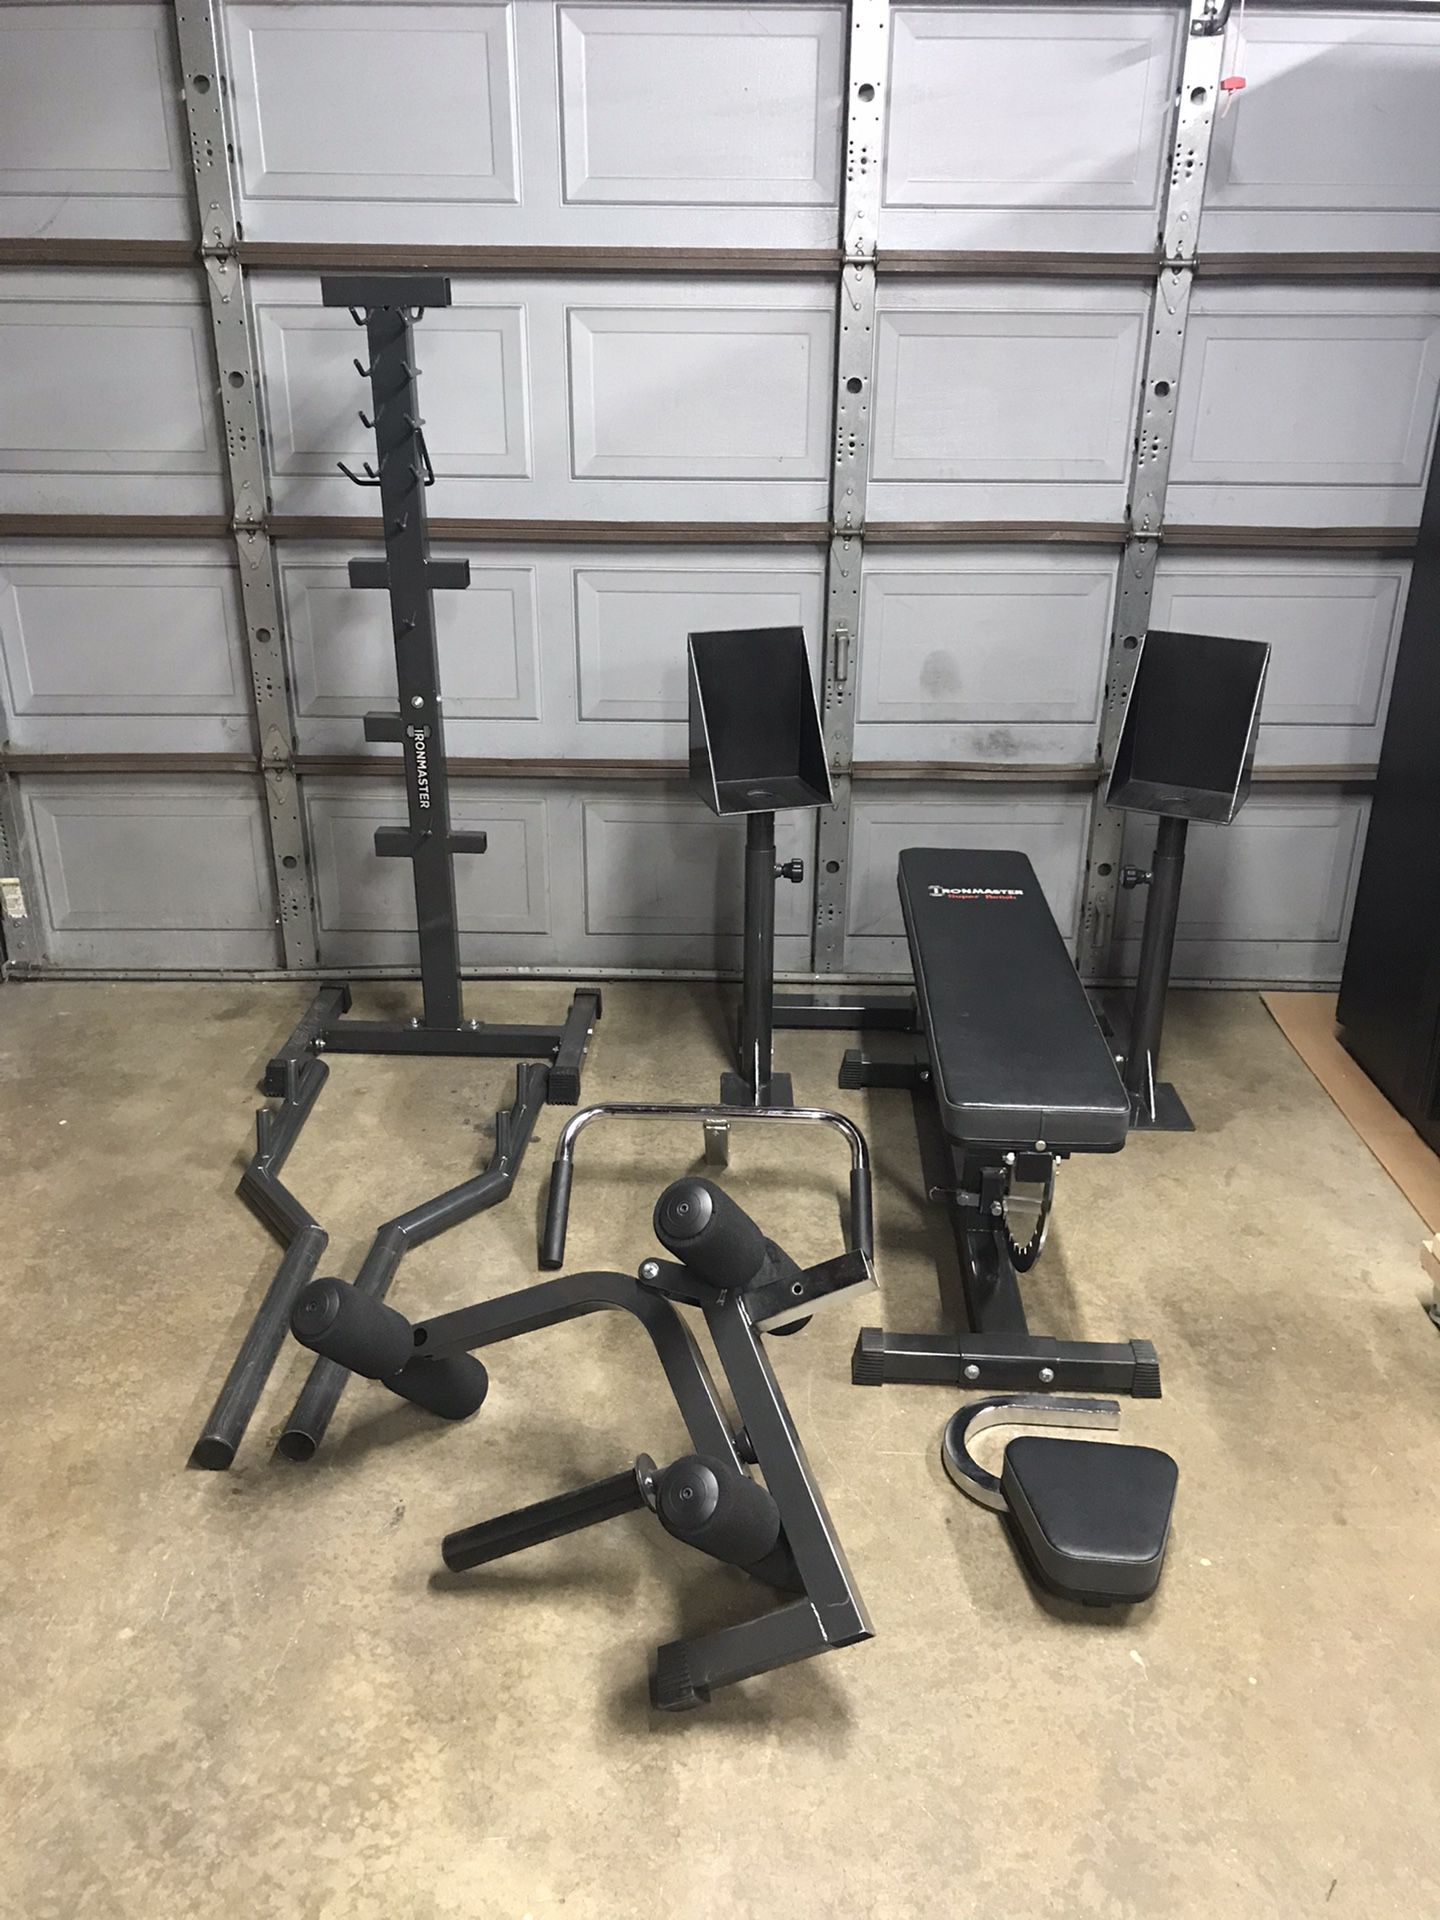 Ironmaster - Home Gym nearly $400 Off Retail